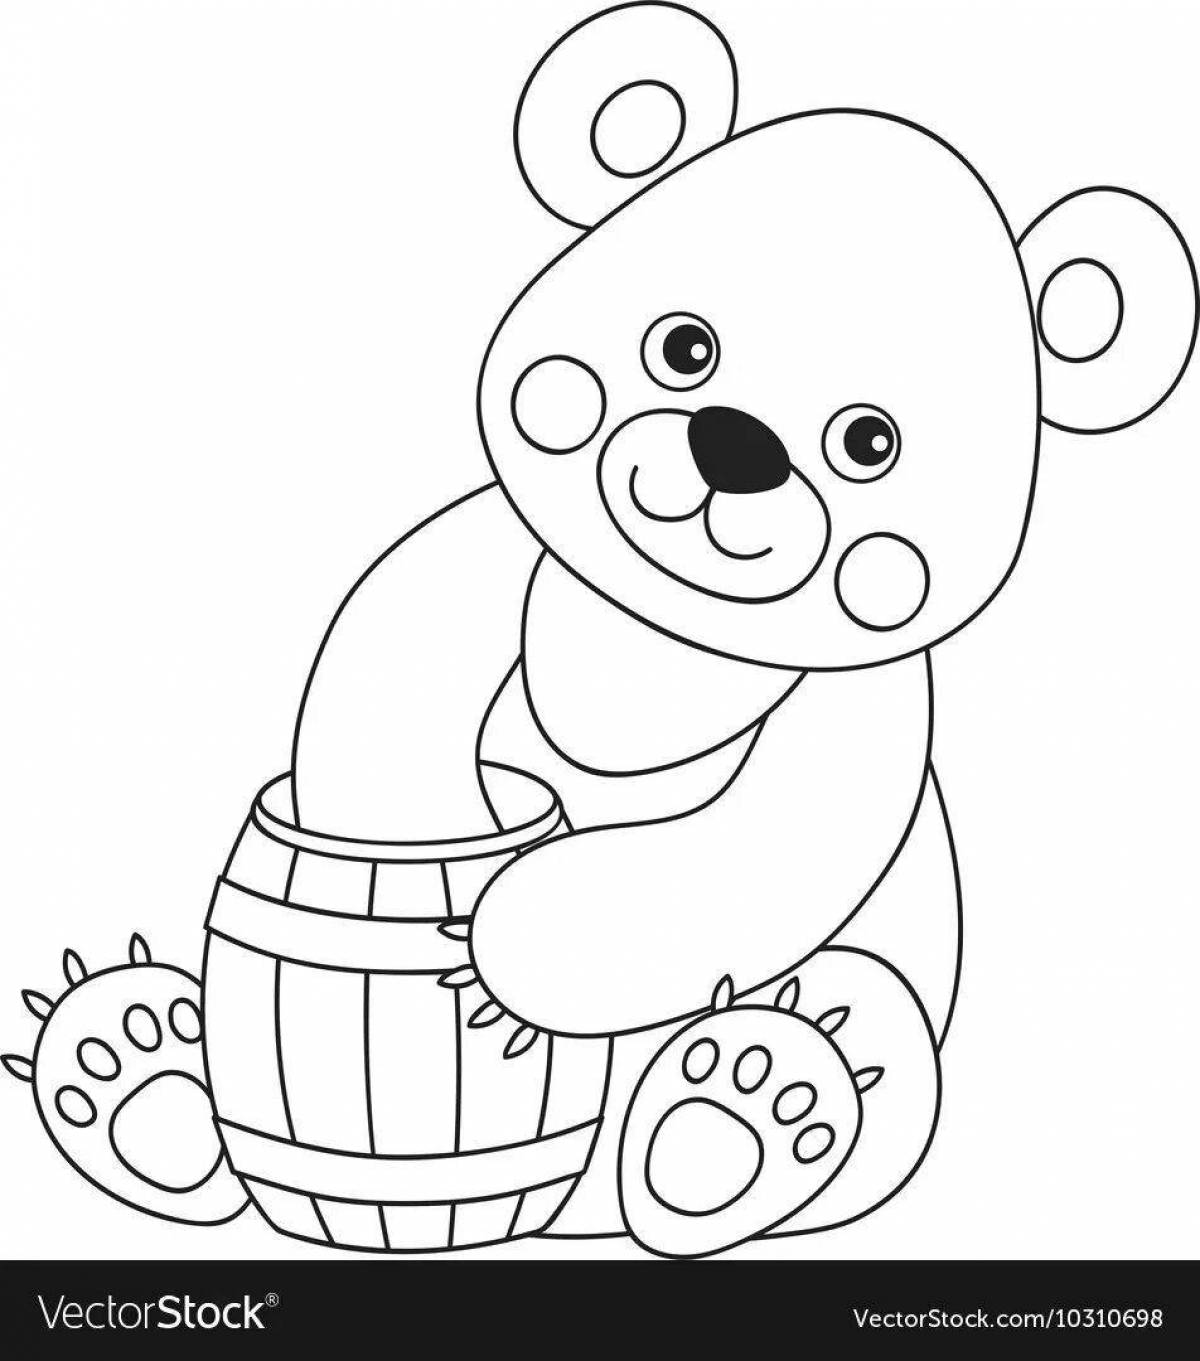 Bubble bear with honey coloring book